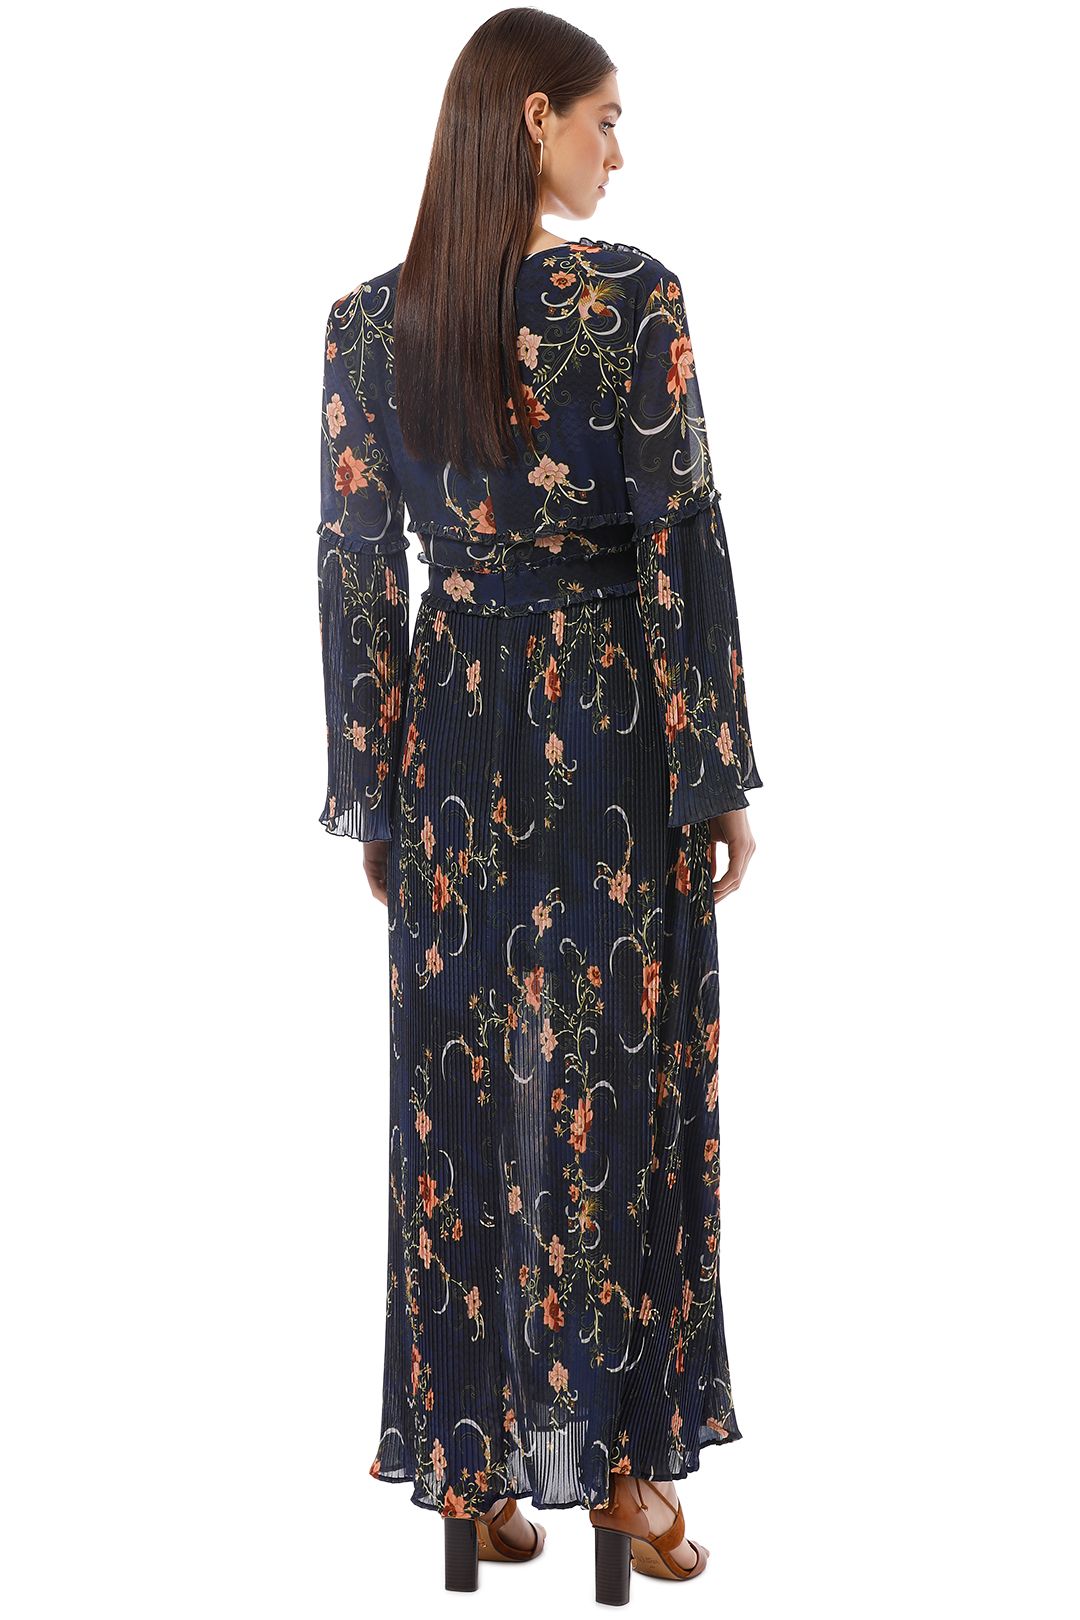 We Are Kindred - Adele Pleated Maxi Dress - Navy Floral - Back